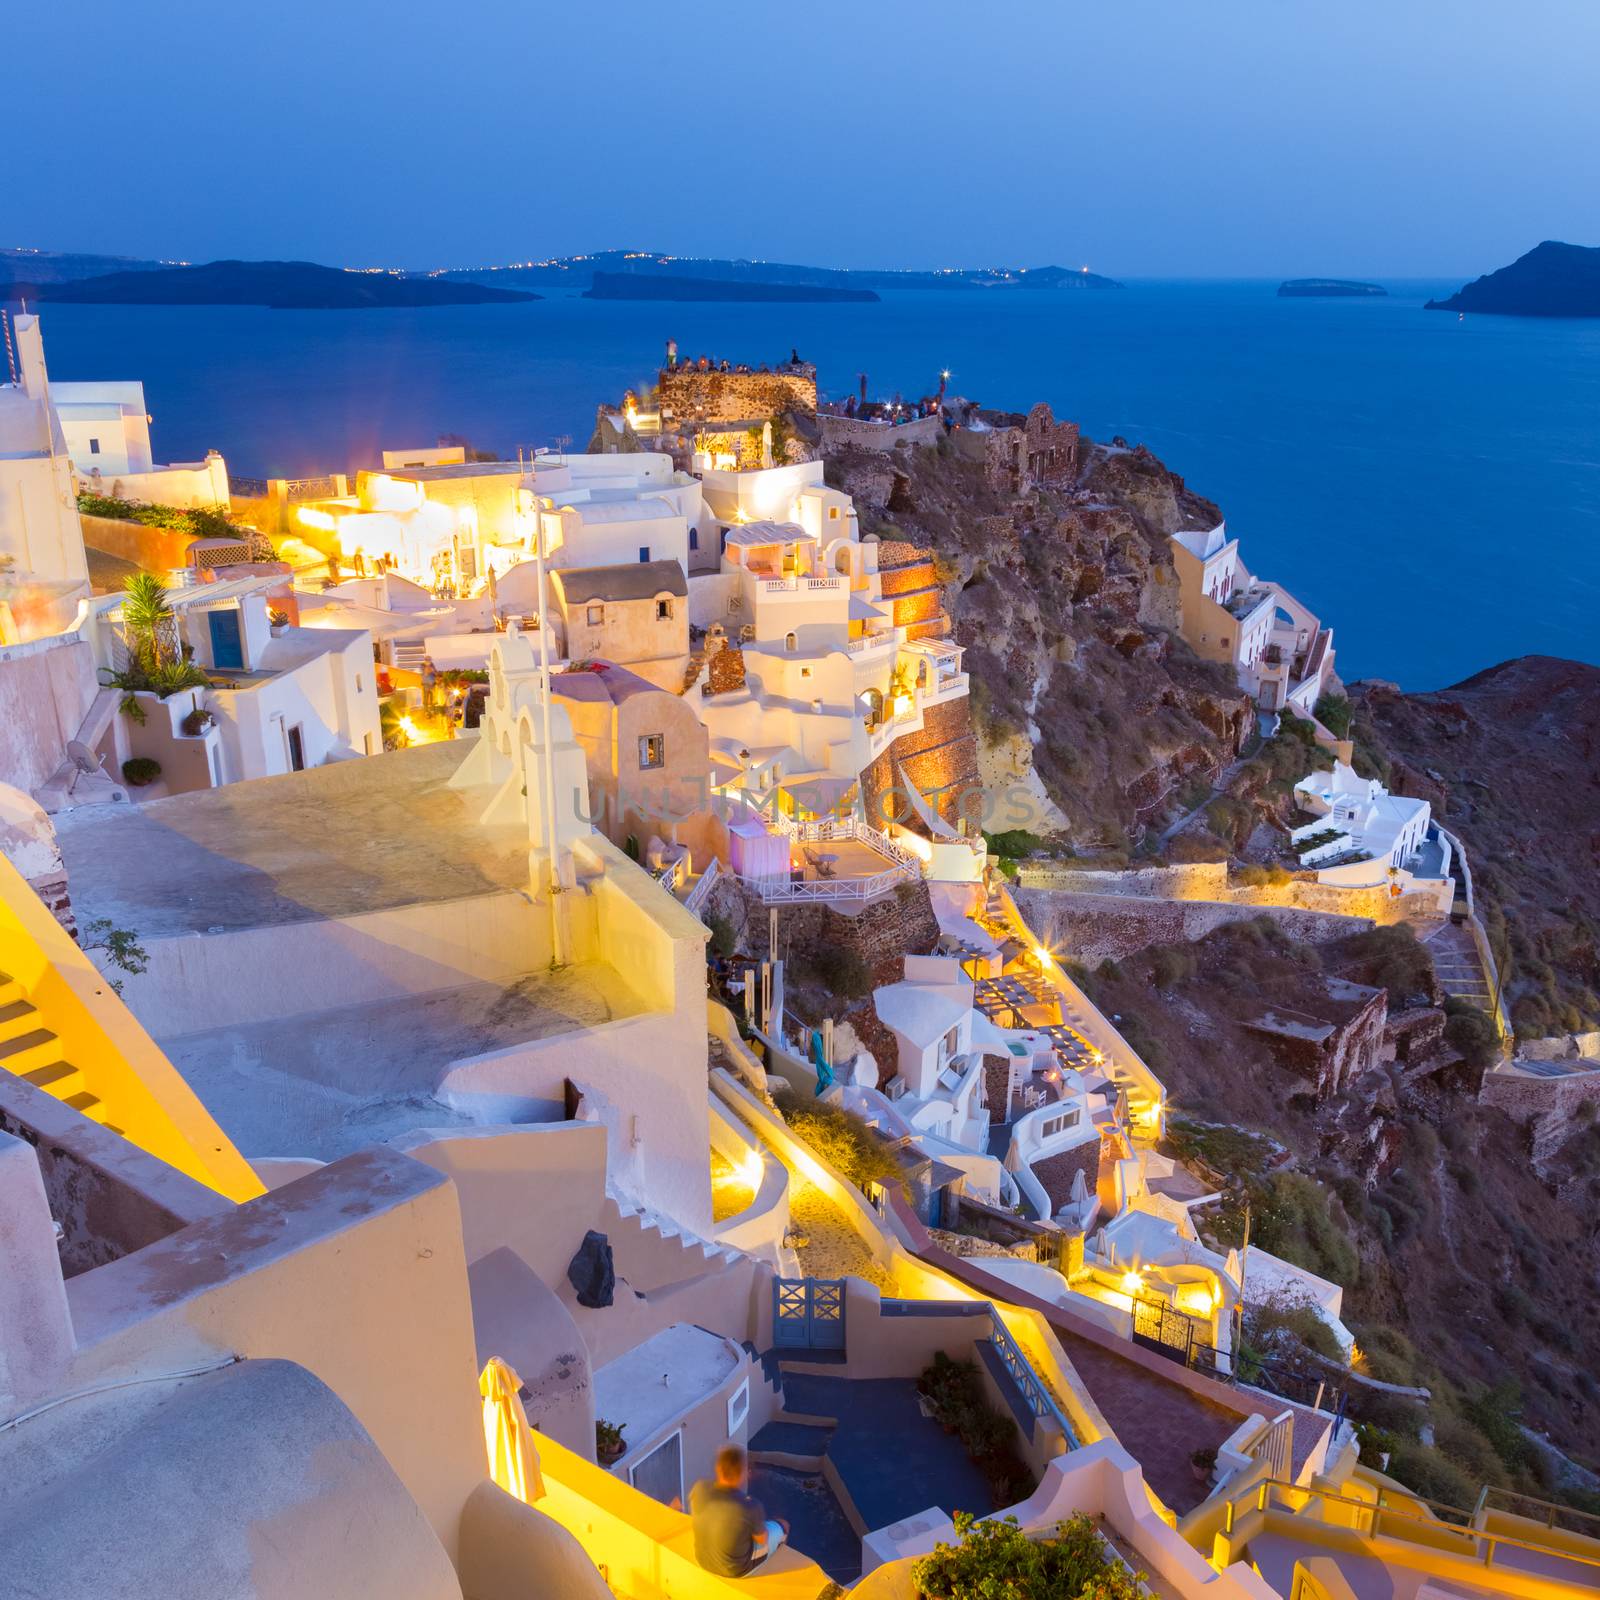 World famous traditional whitewashed chuches and houses of Oia village on Santorini island, Greece. Sunset.